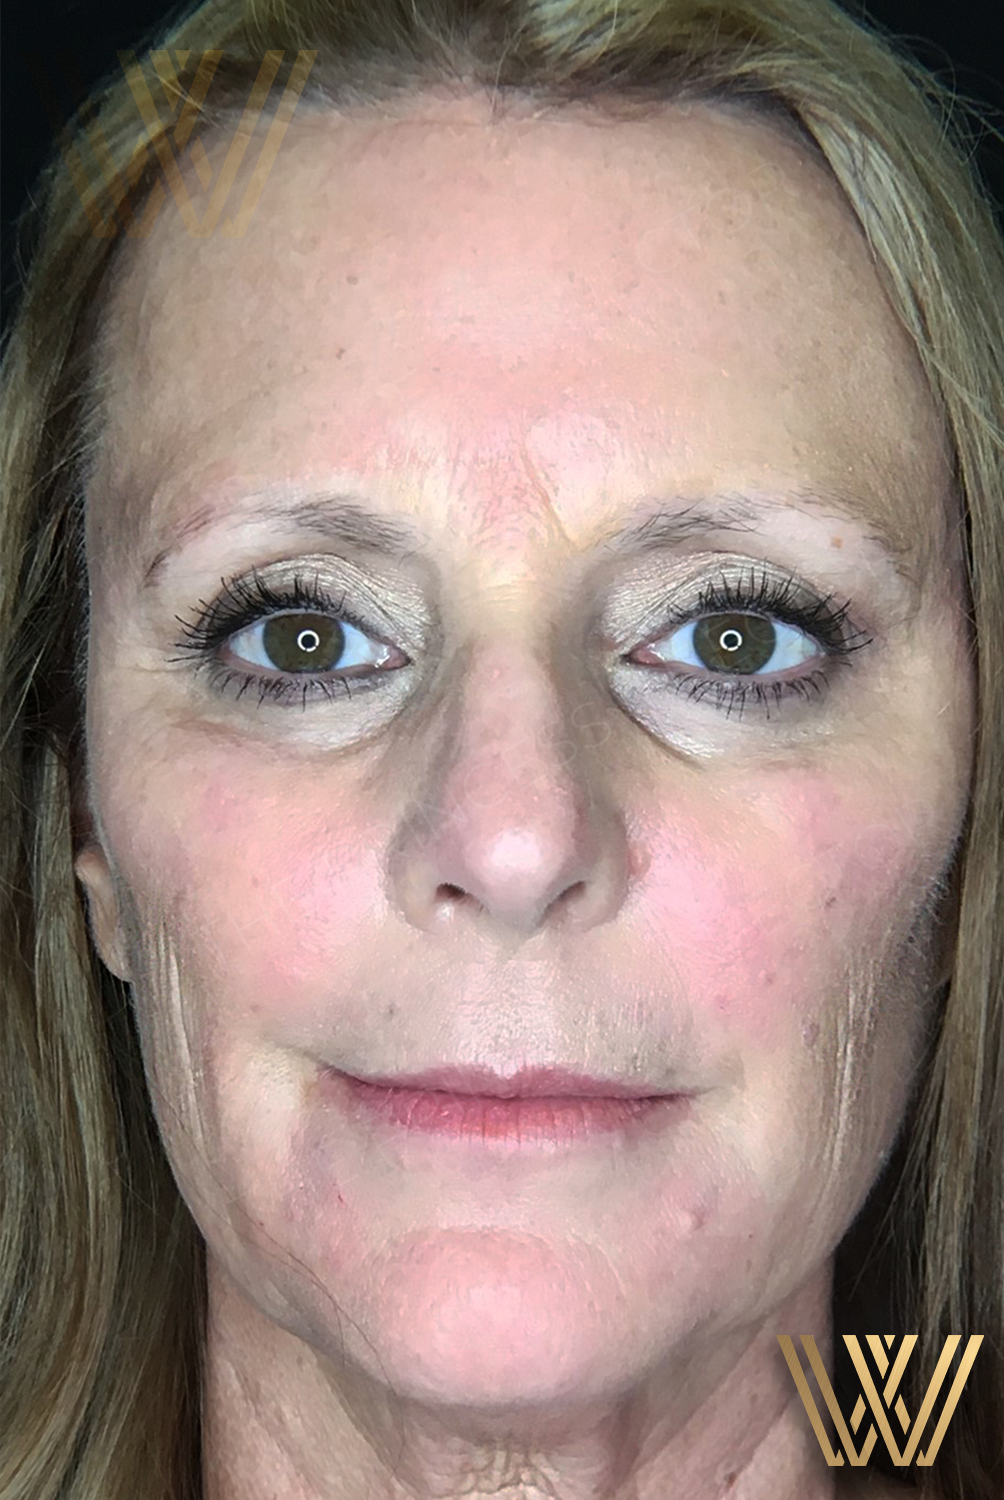 Middle-aged woman before undergoing Sculptra treatment at Windermere Medical Spa & Laser Institute in Orlando, FL, showing signs of aging.